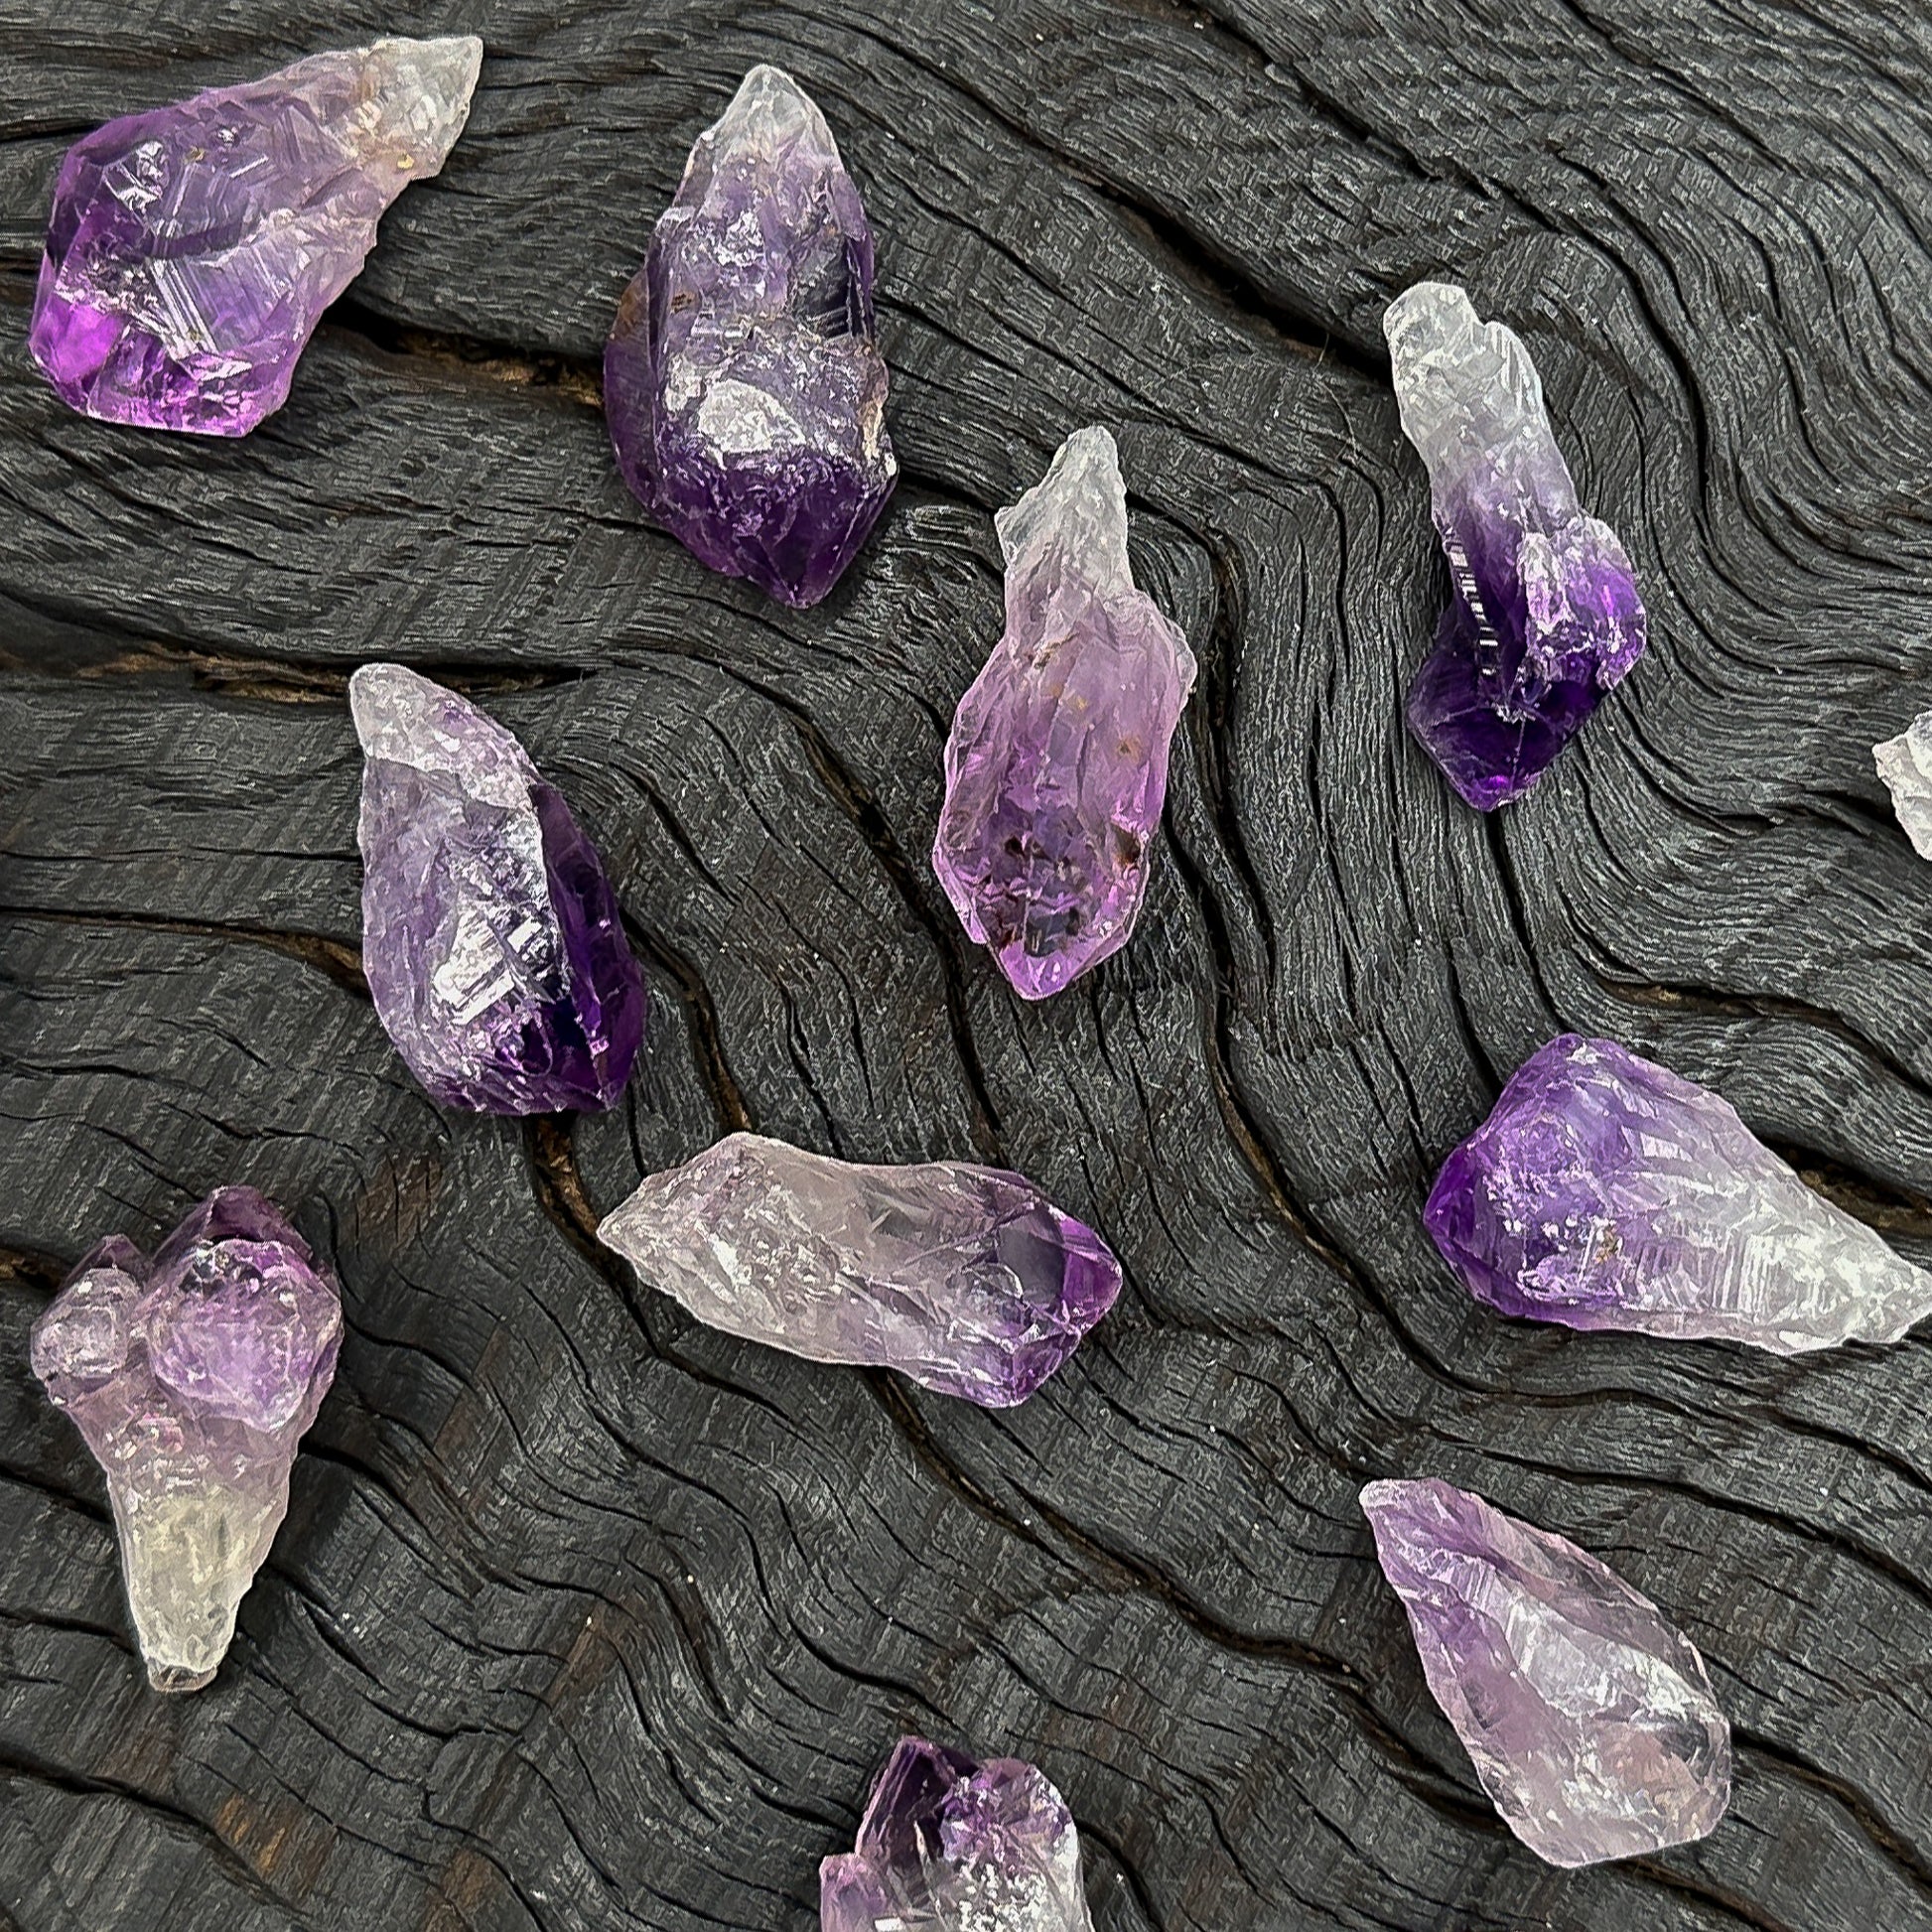 Amethyst Raw Natural Point Bead - 1 pc.-The Bead Gallery Honolulu